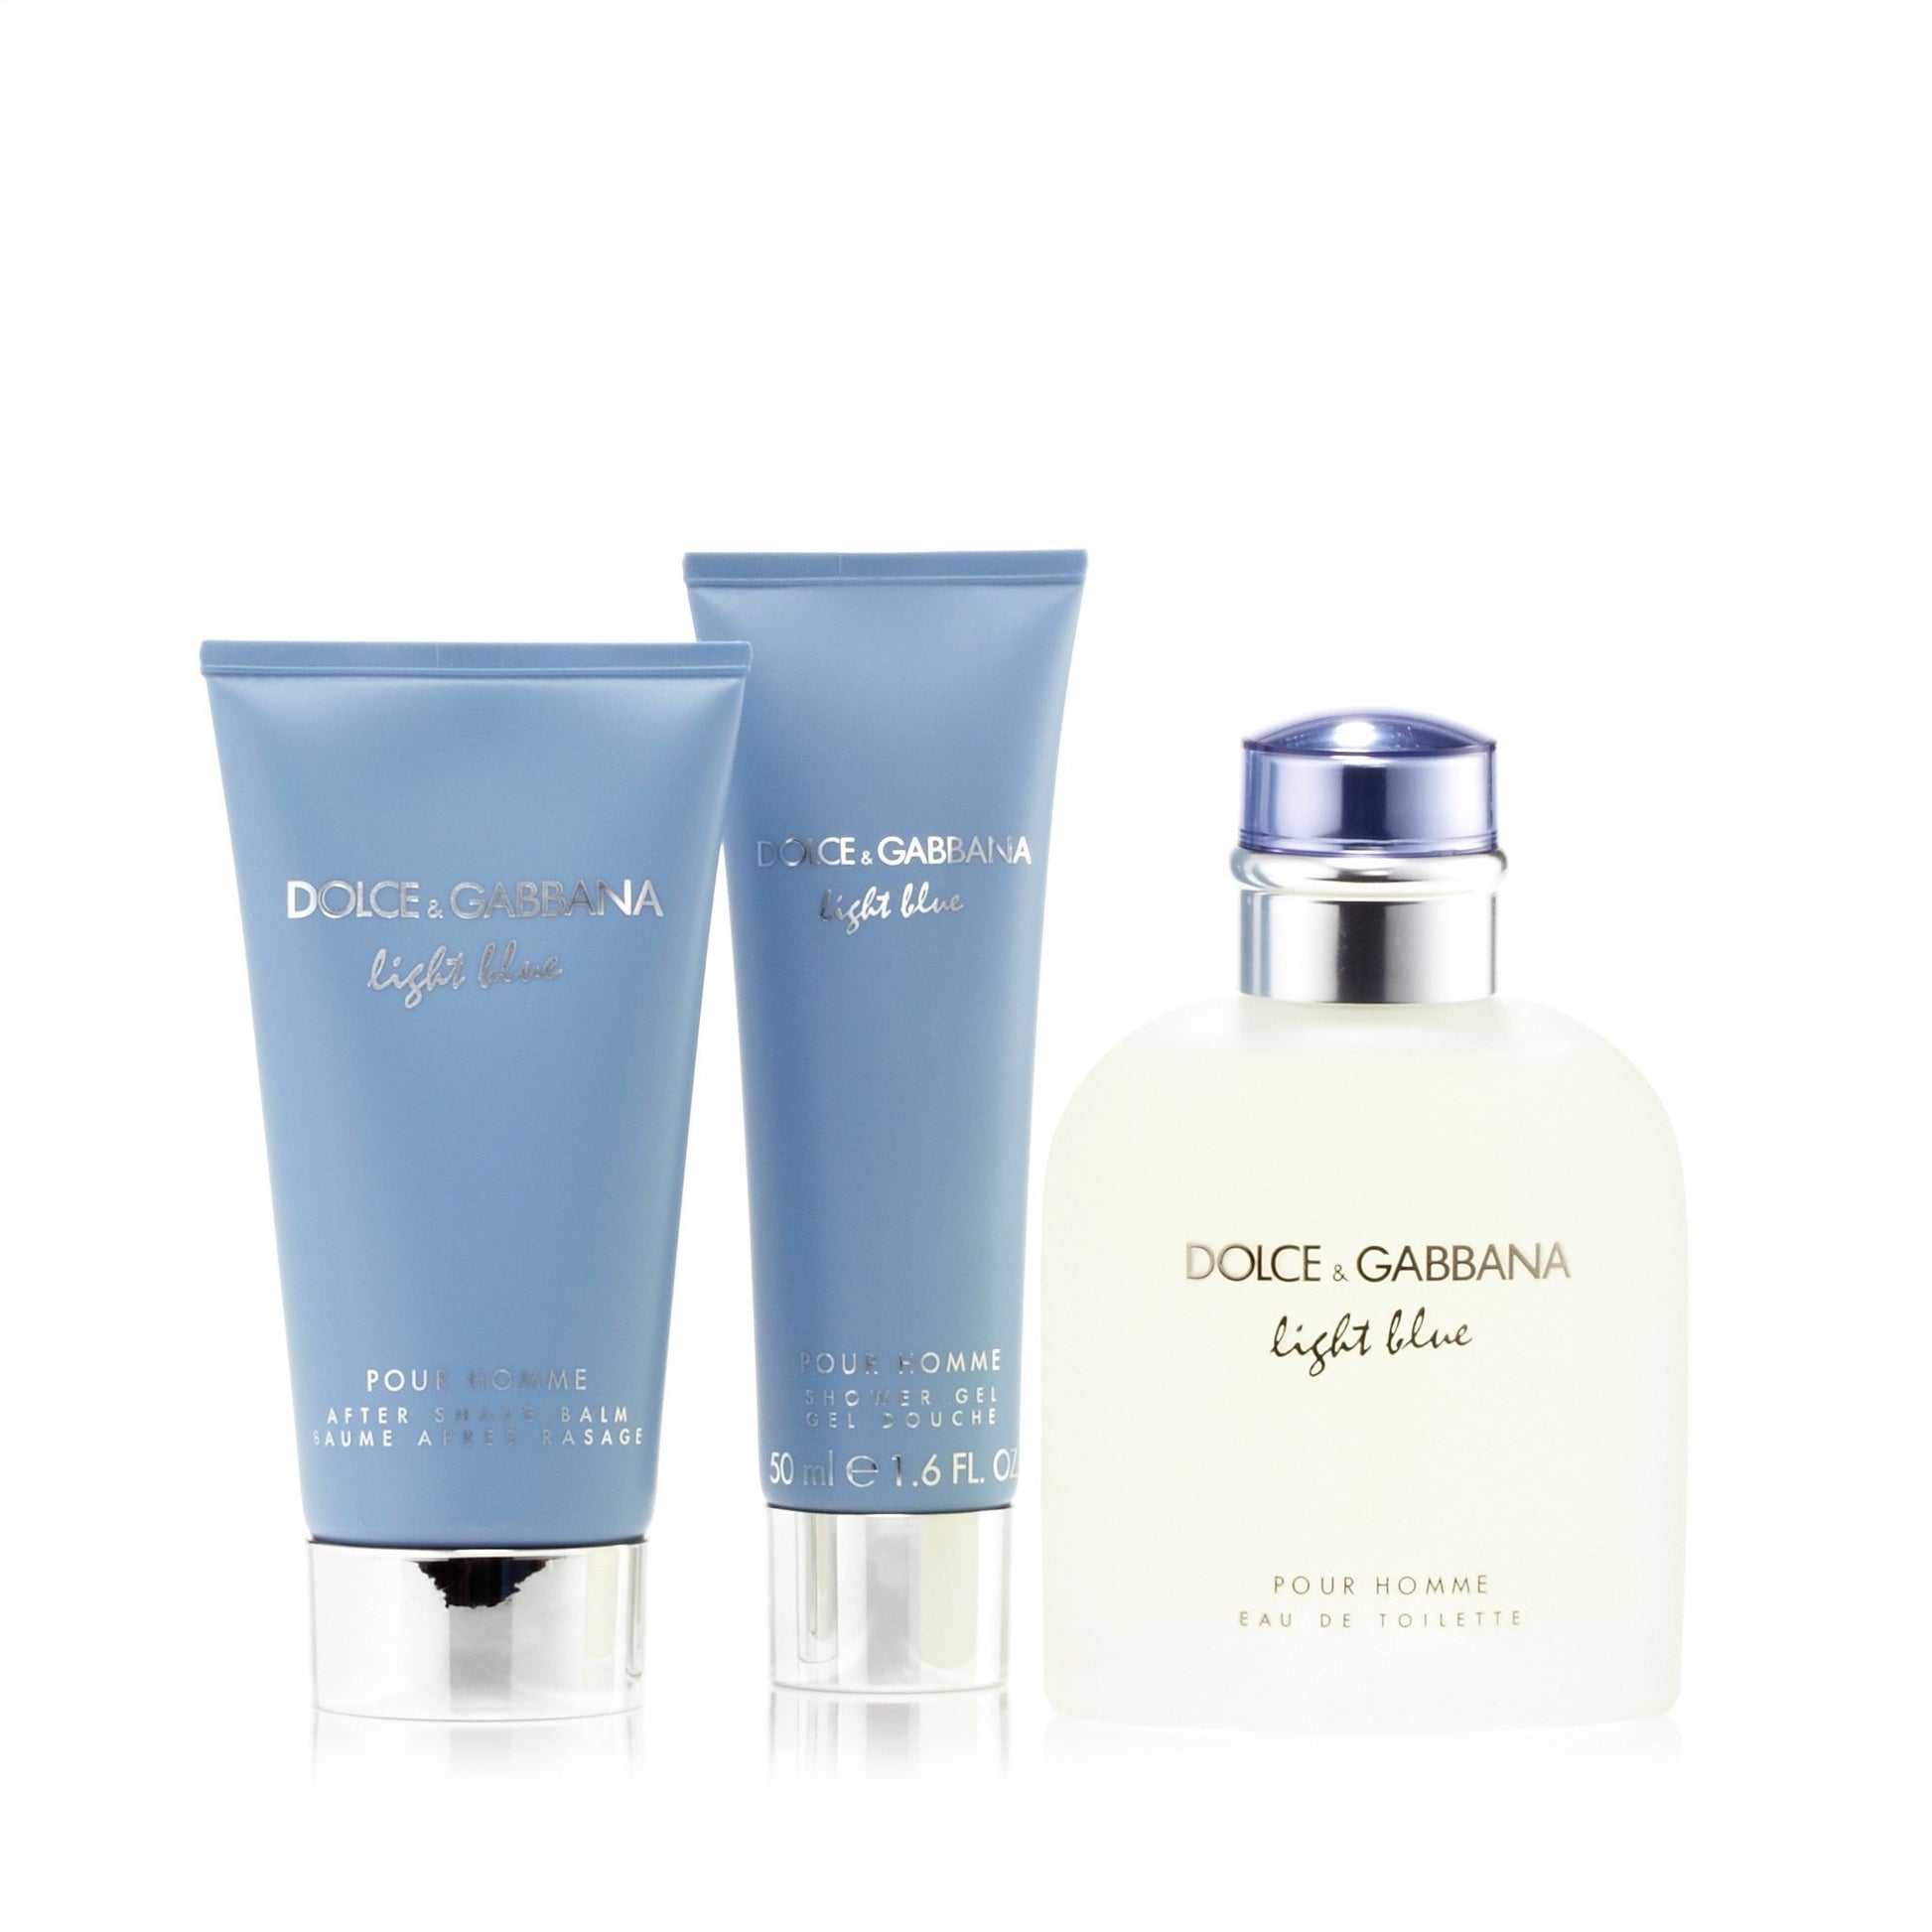 Light Blue Gift Set for Men by D&G 4.2 oz. Click to open in modal